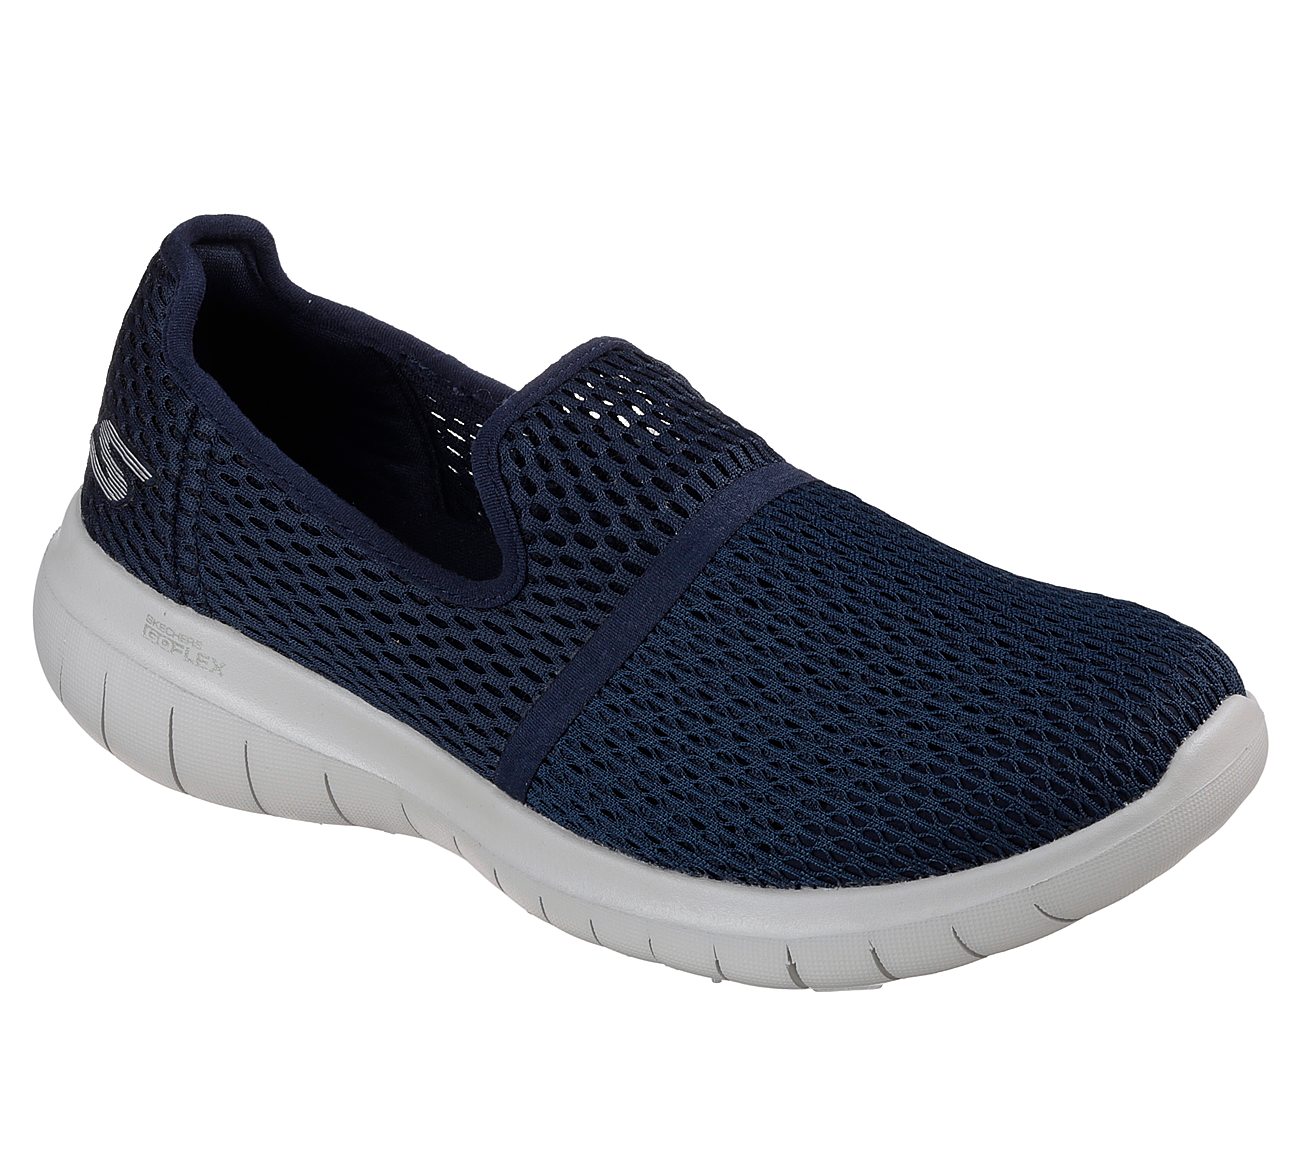 goga max skechers shoes Sale,up to 47 